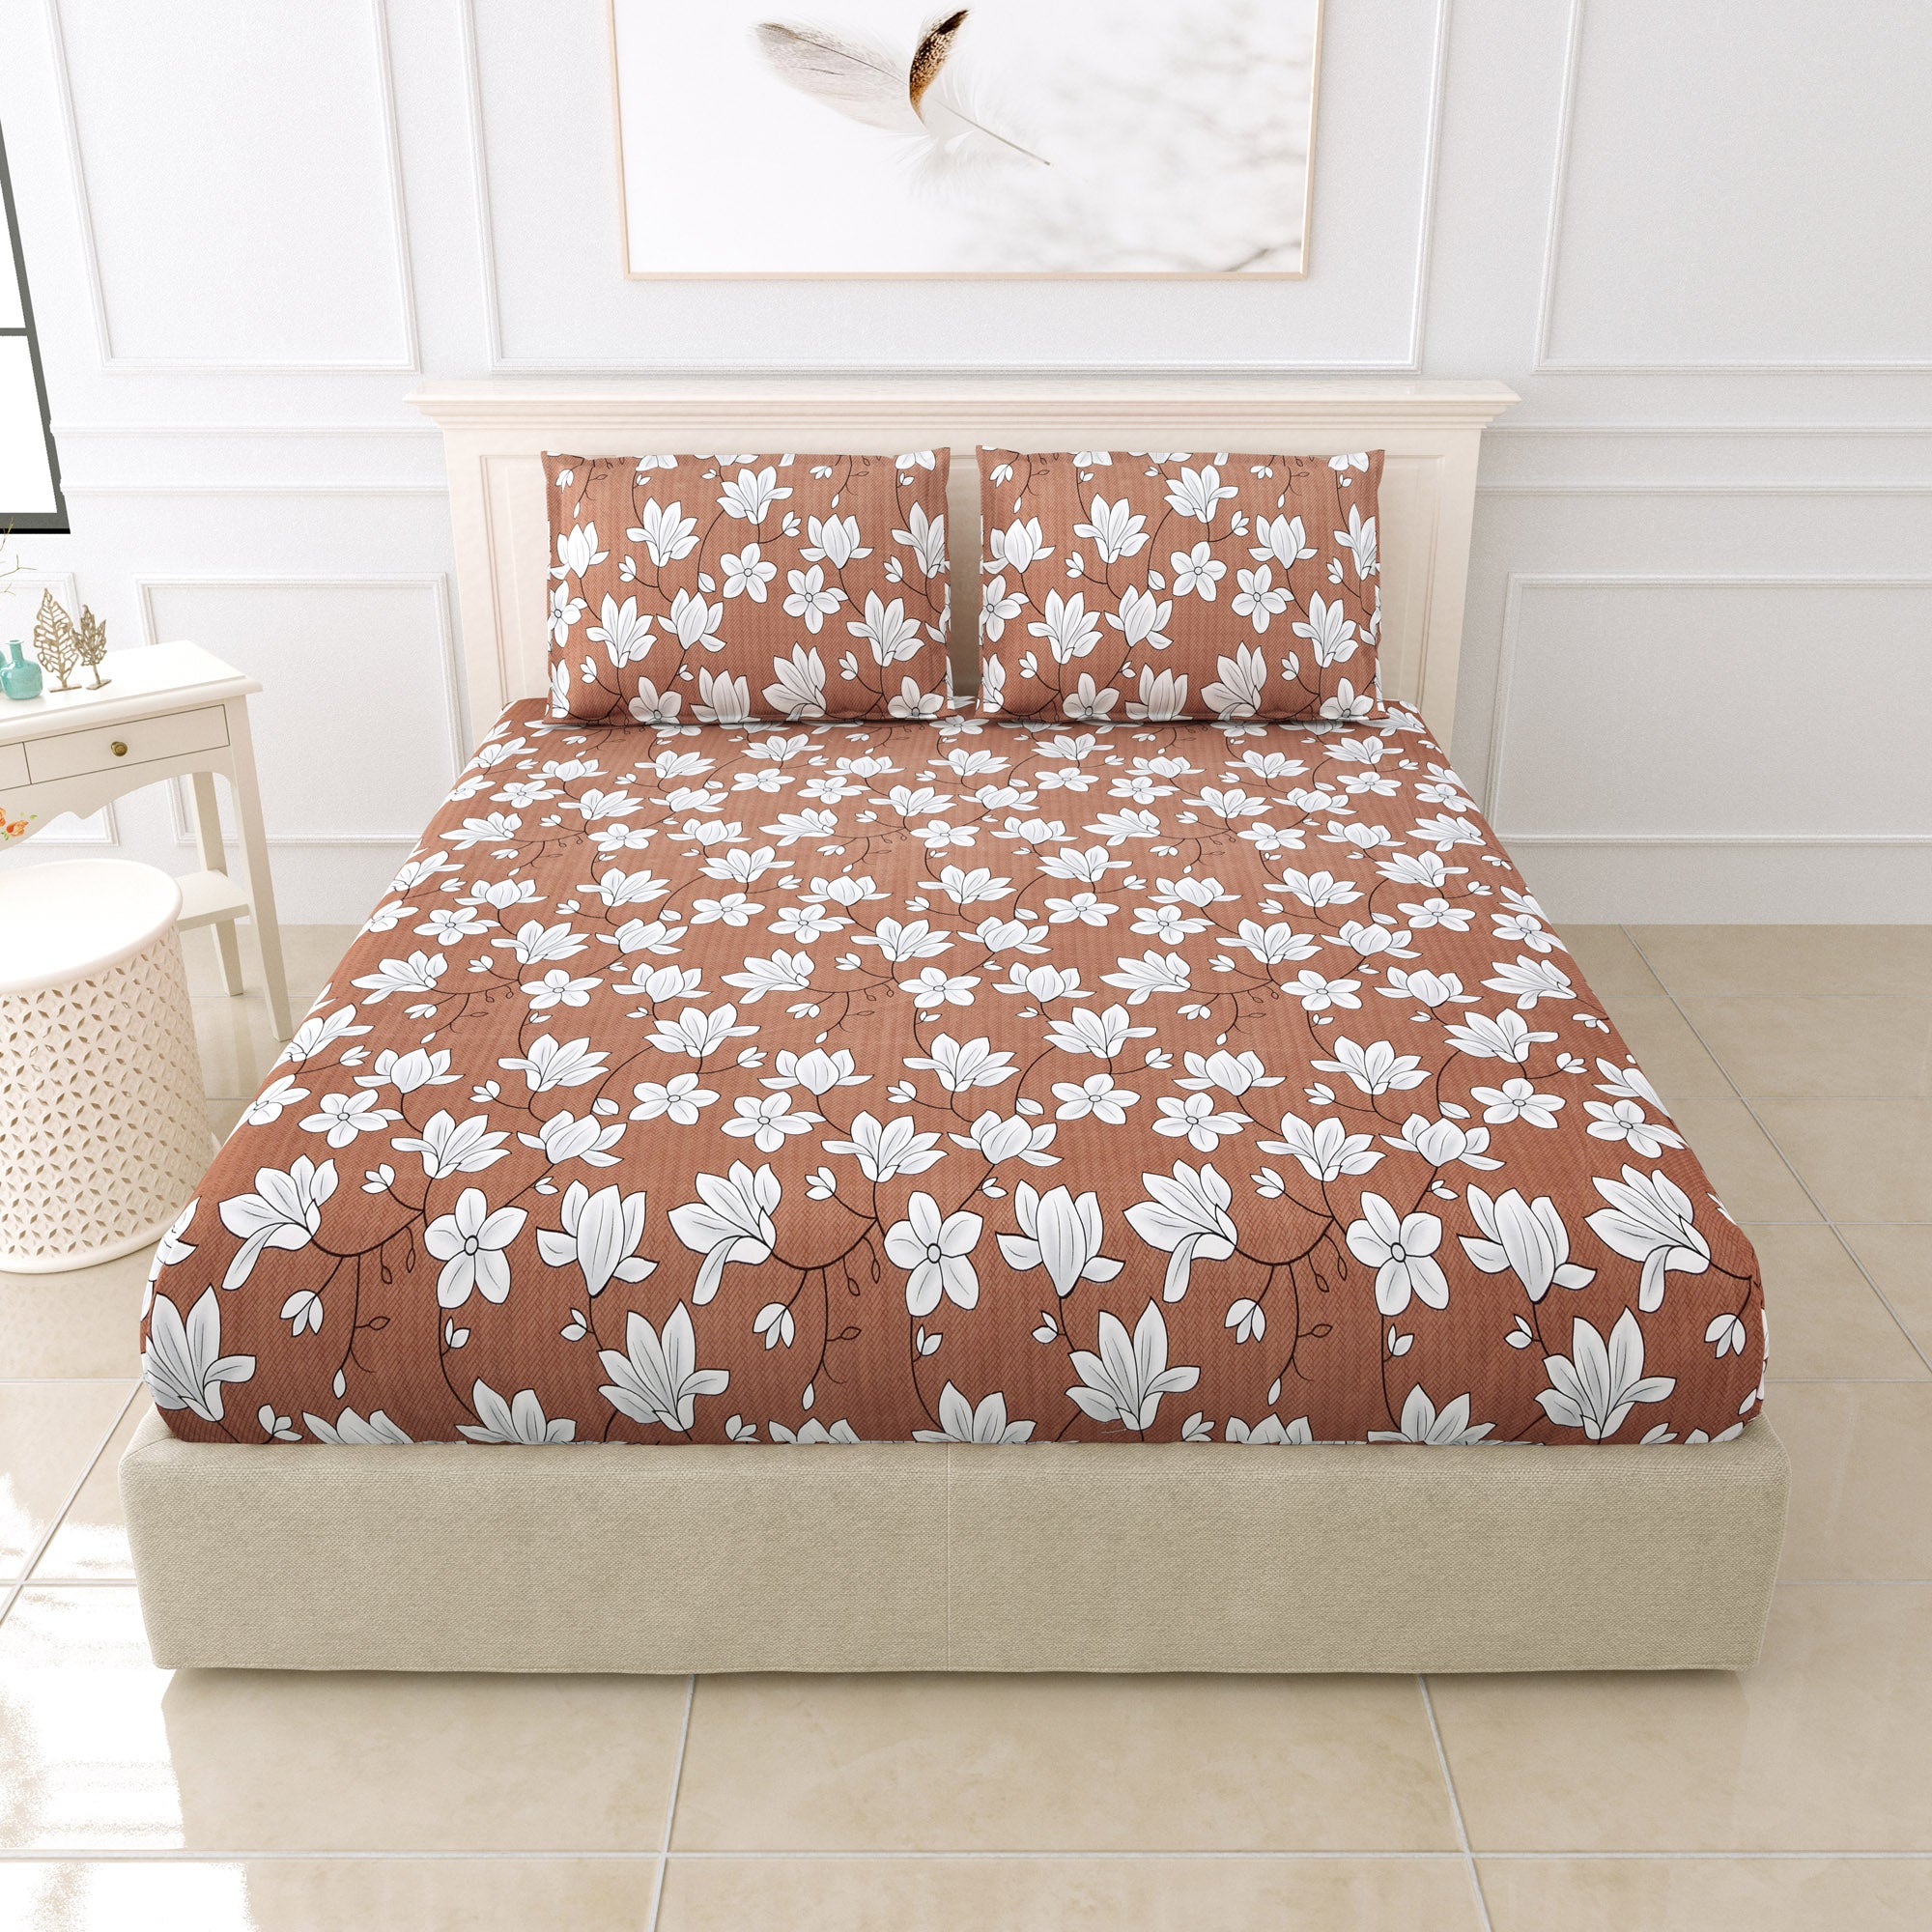 eCraftIndia 250 TC Brown & White Flowers Printed Cotton Double Bedsheet With 2 Pillow Covers